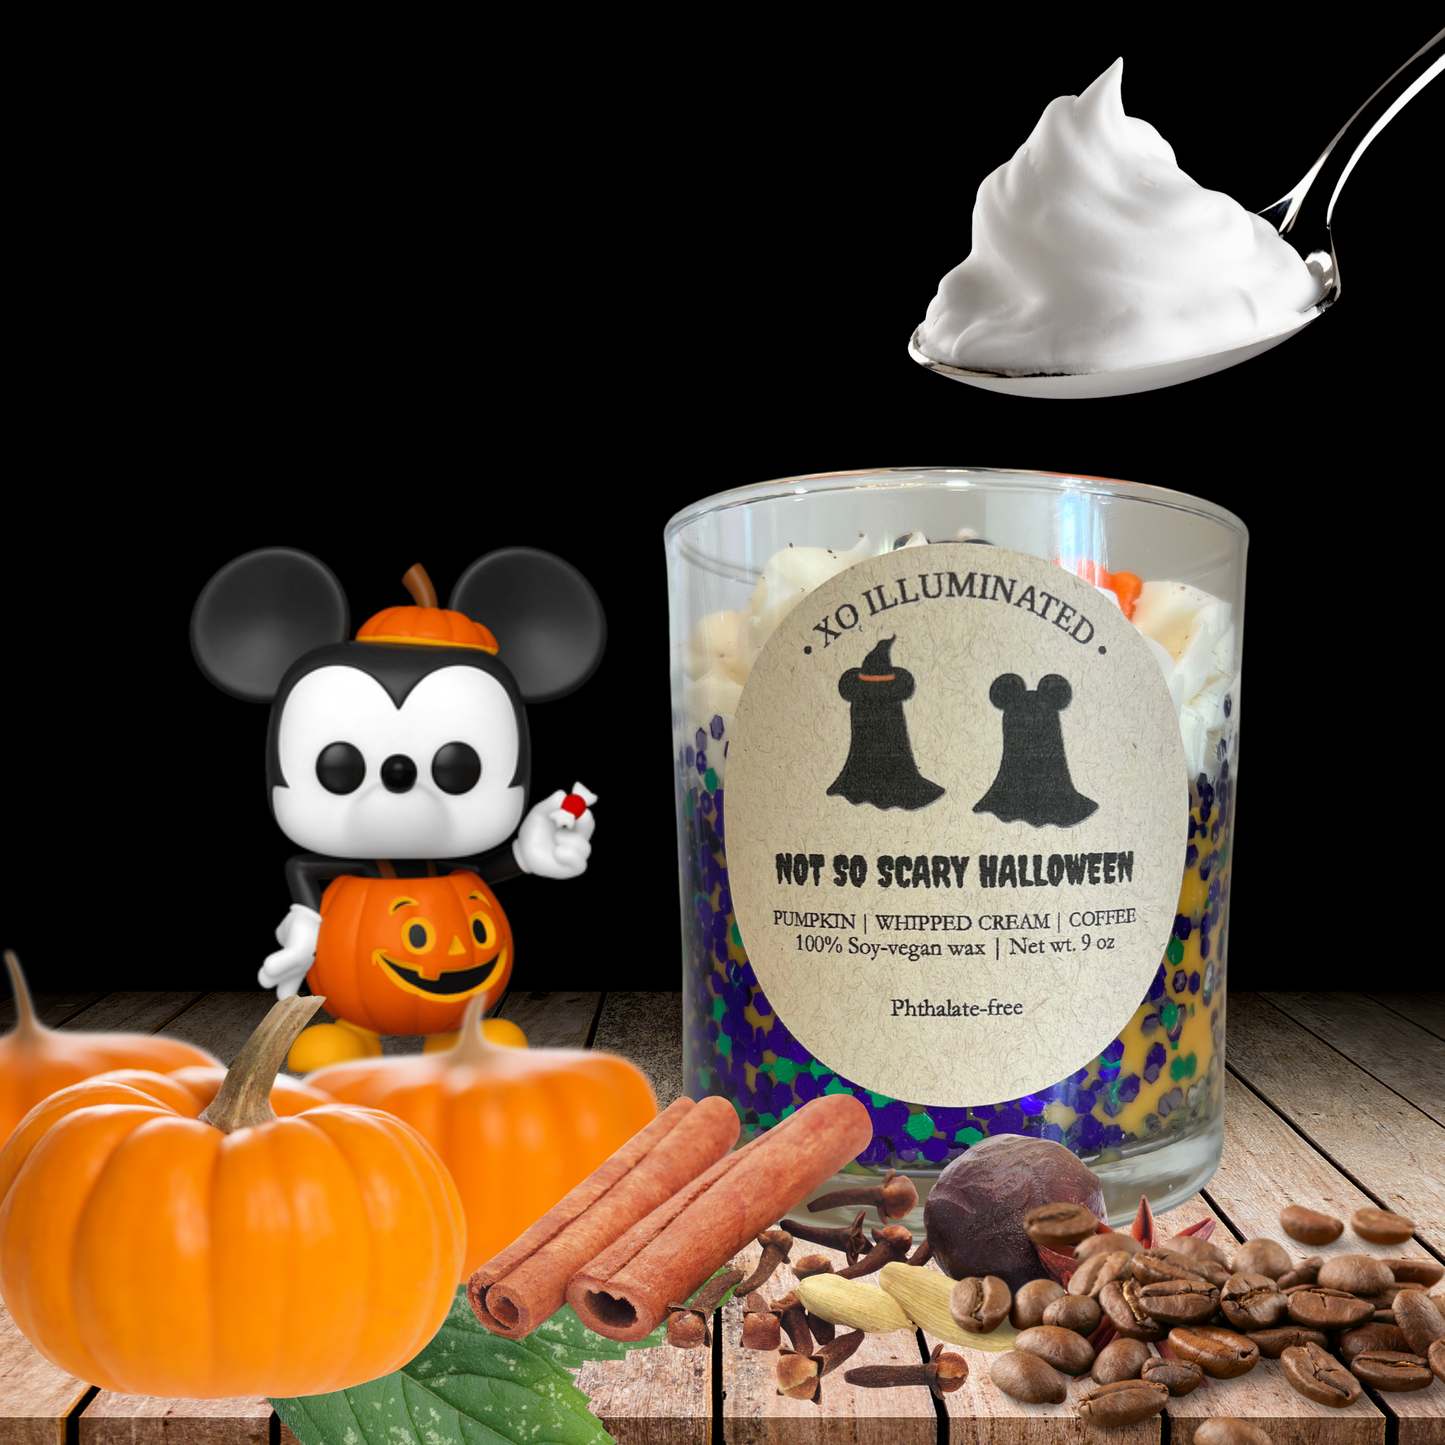 Spooktacular Not So Scary Halloween Candle